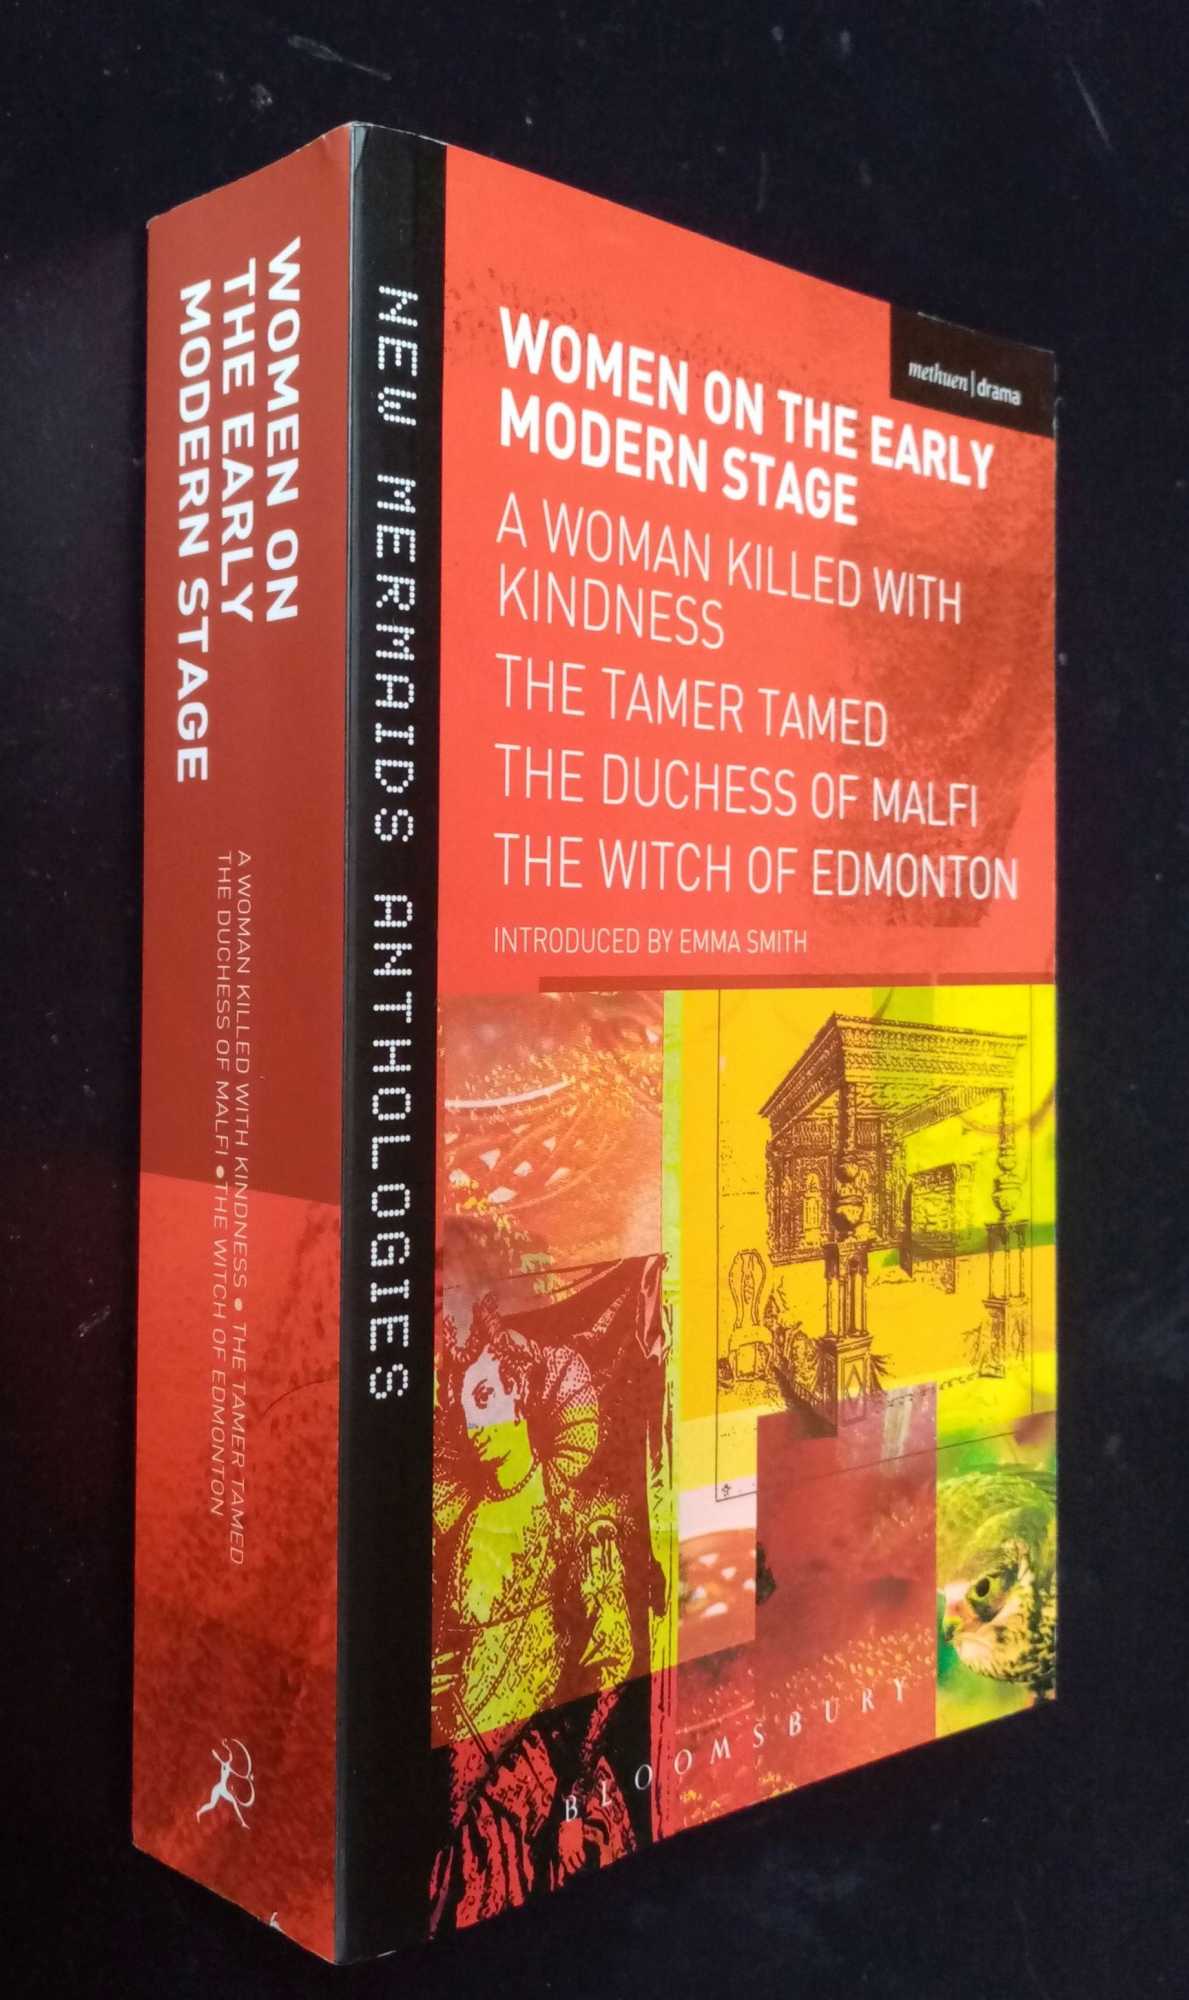 Emma Smith,ed. - Women on the Early Modern Stage: A Woman Killed with Kindness, The Tamer Tamed, The Duchess of Malfi, The Witch of Edmonton